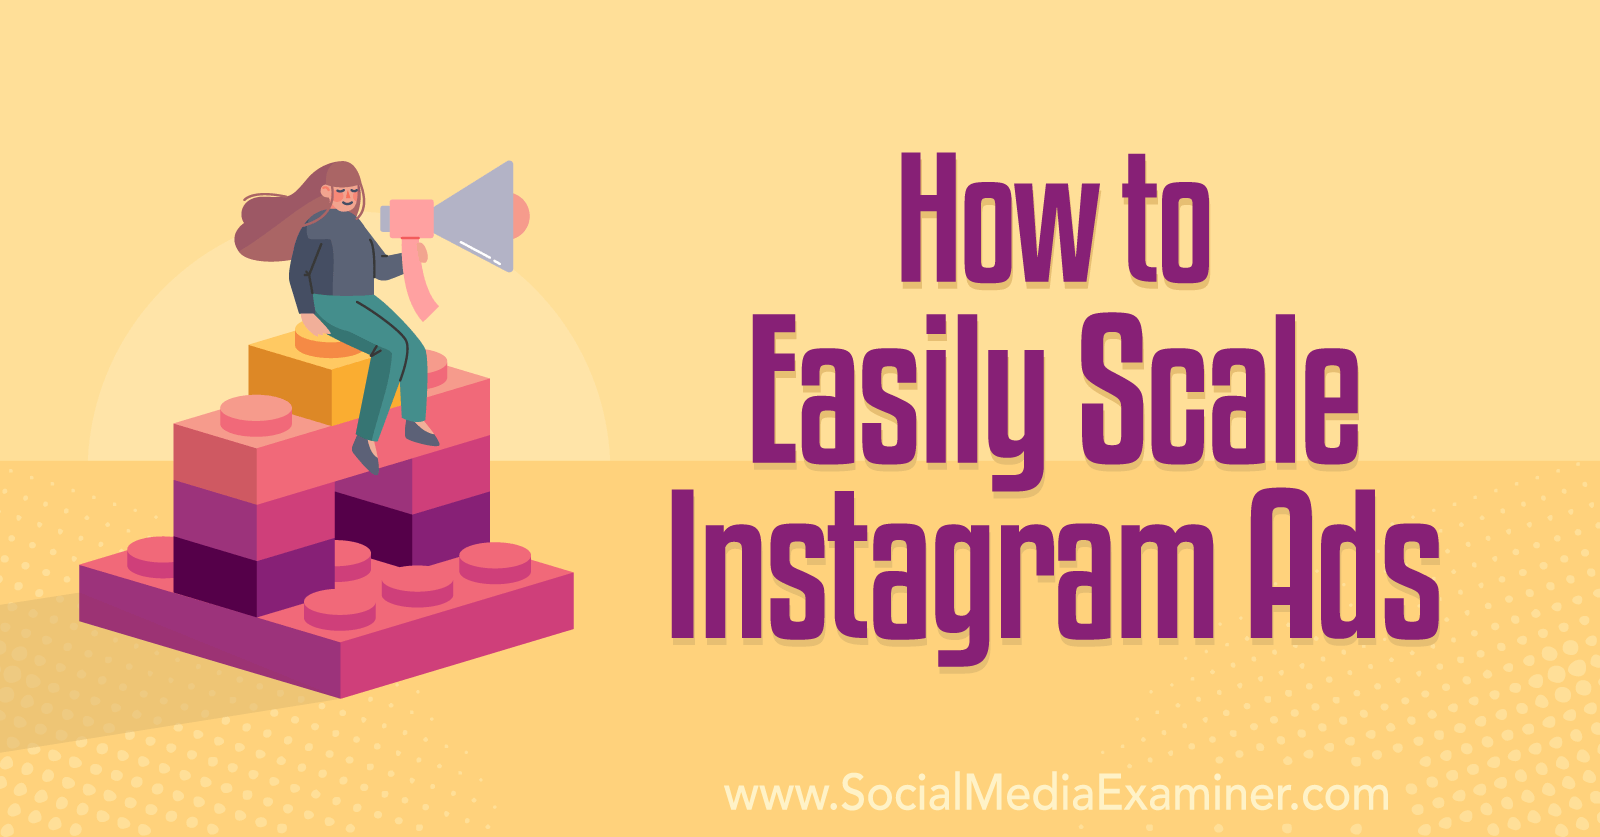 How to Easily Scale Instagram Ads-Social Media Examiner